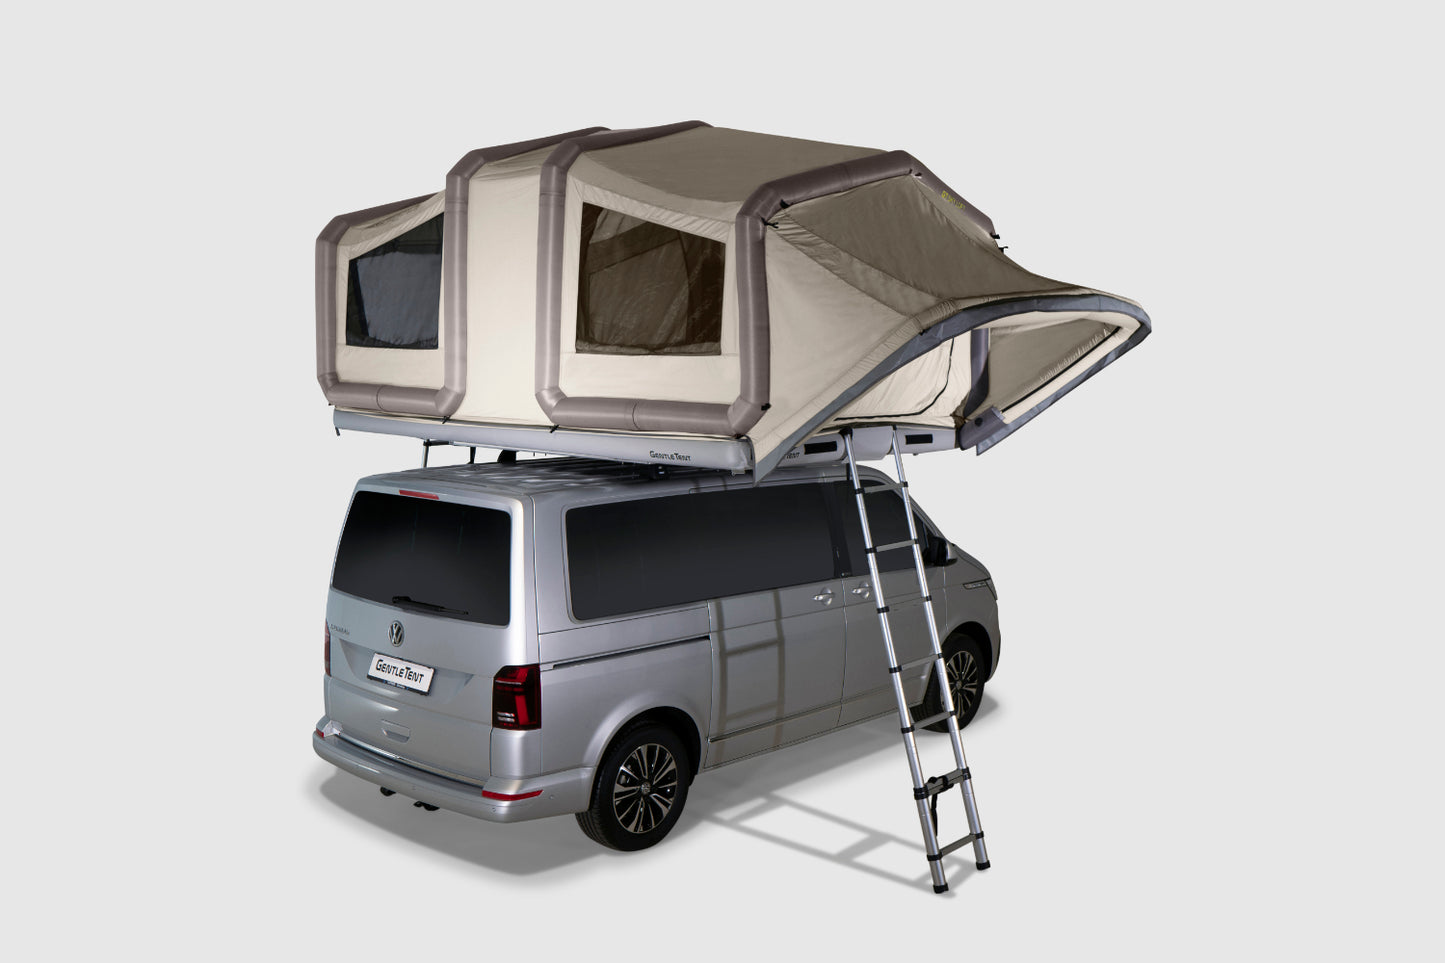 Olive GT Skyloft tent fully inflated and set up on top of a van.